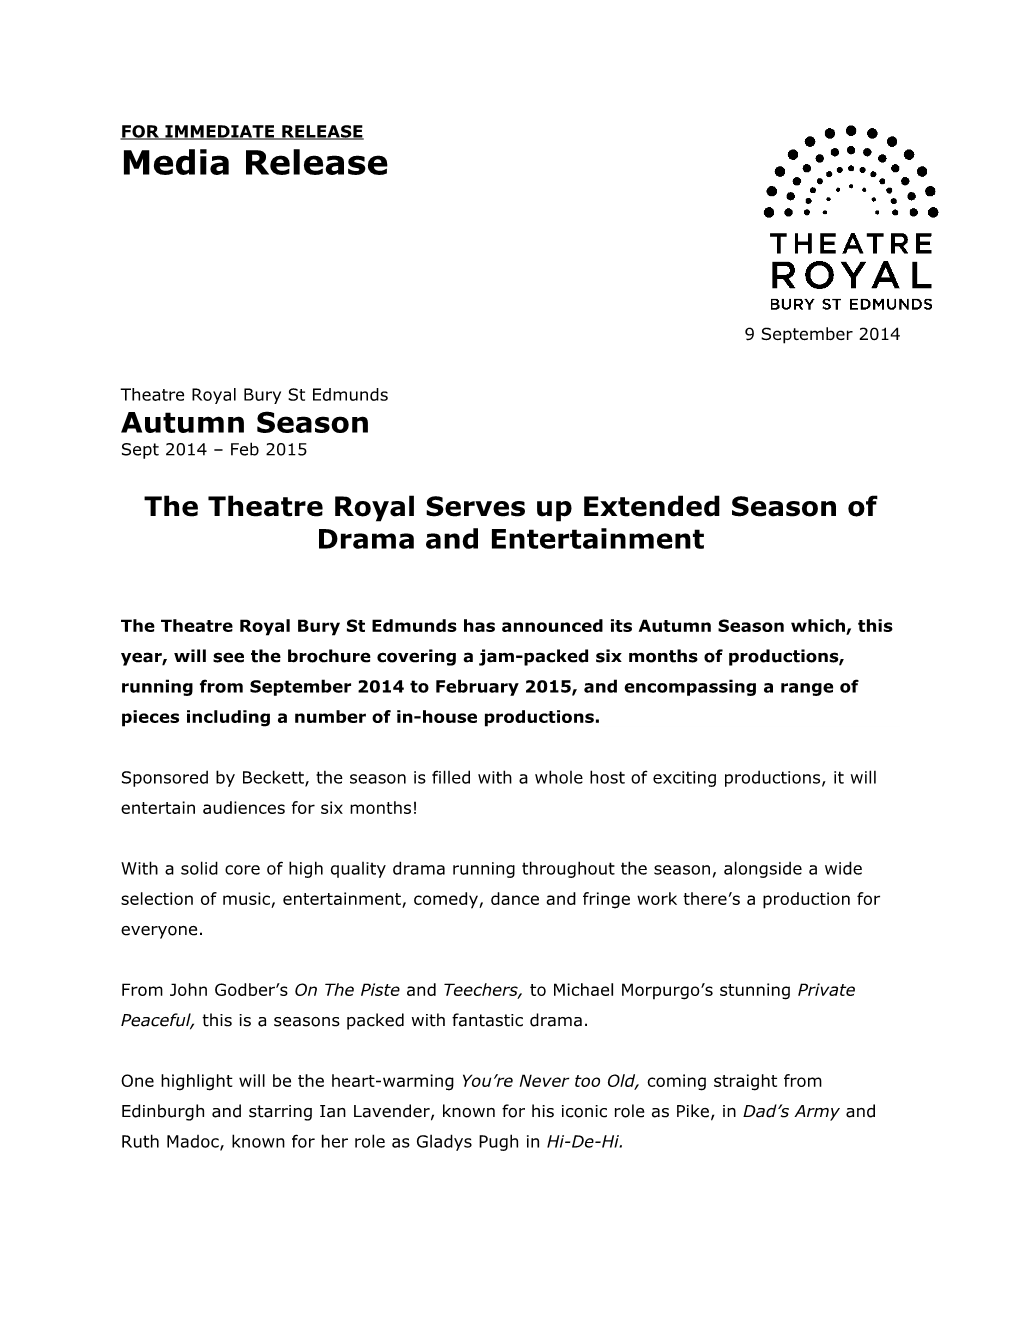 The Theatre Royal Serves up Extended Season of Drama and Entertainment